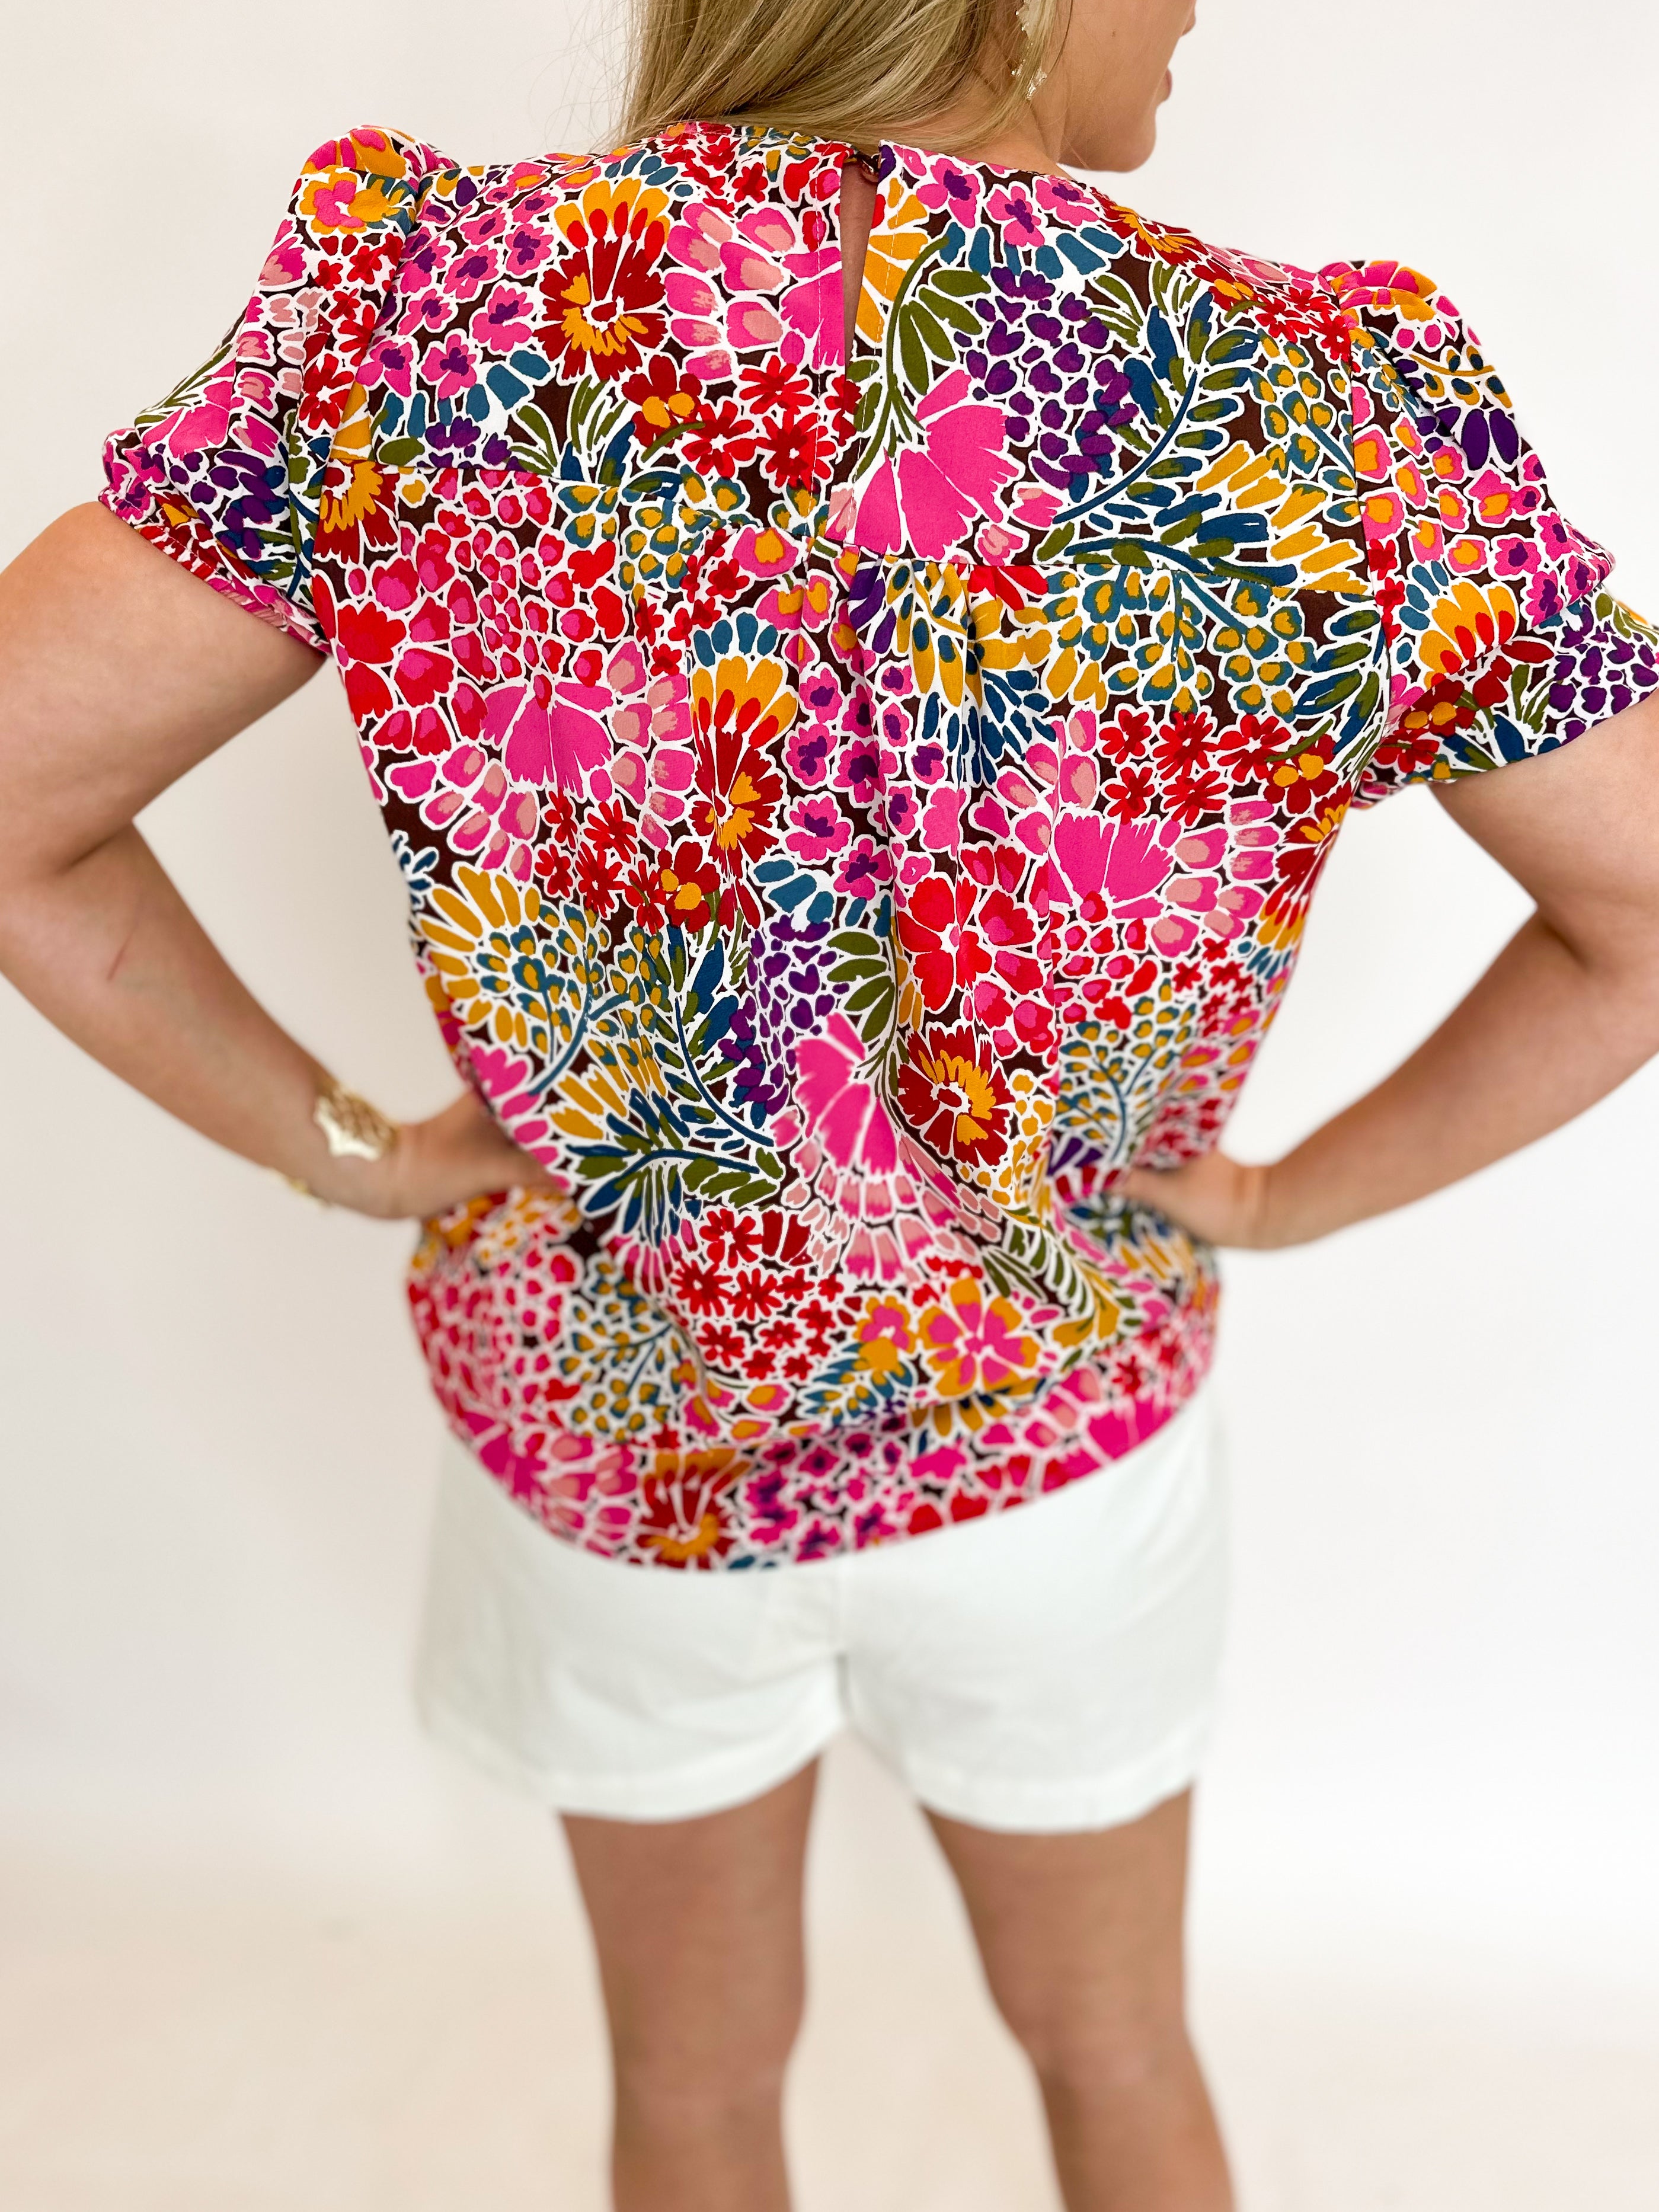 Bold Floral Embroidered Blouse-200 Fashion Blouses-ANDREE BY UNIT-July & June Women's Fashion Boutique Located in San Antonio, Texas